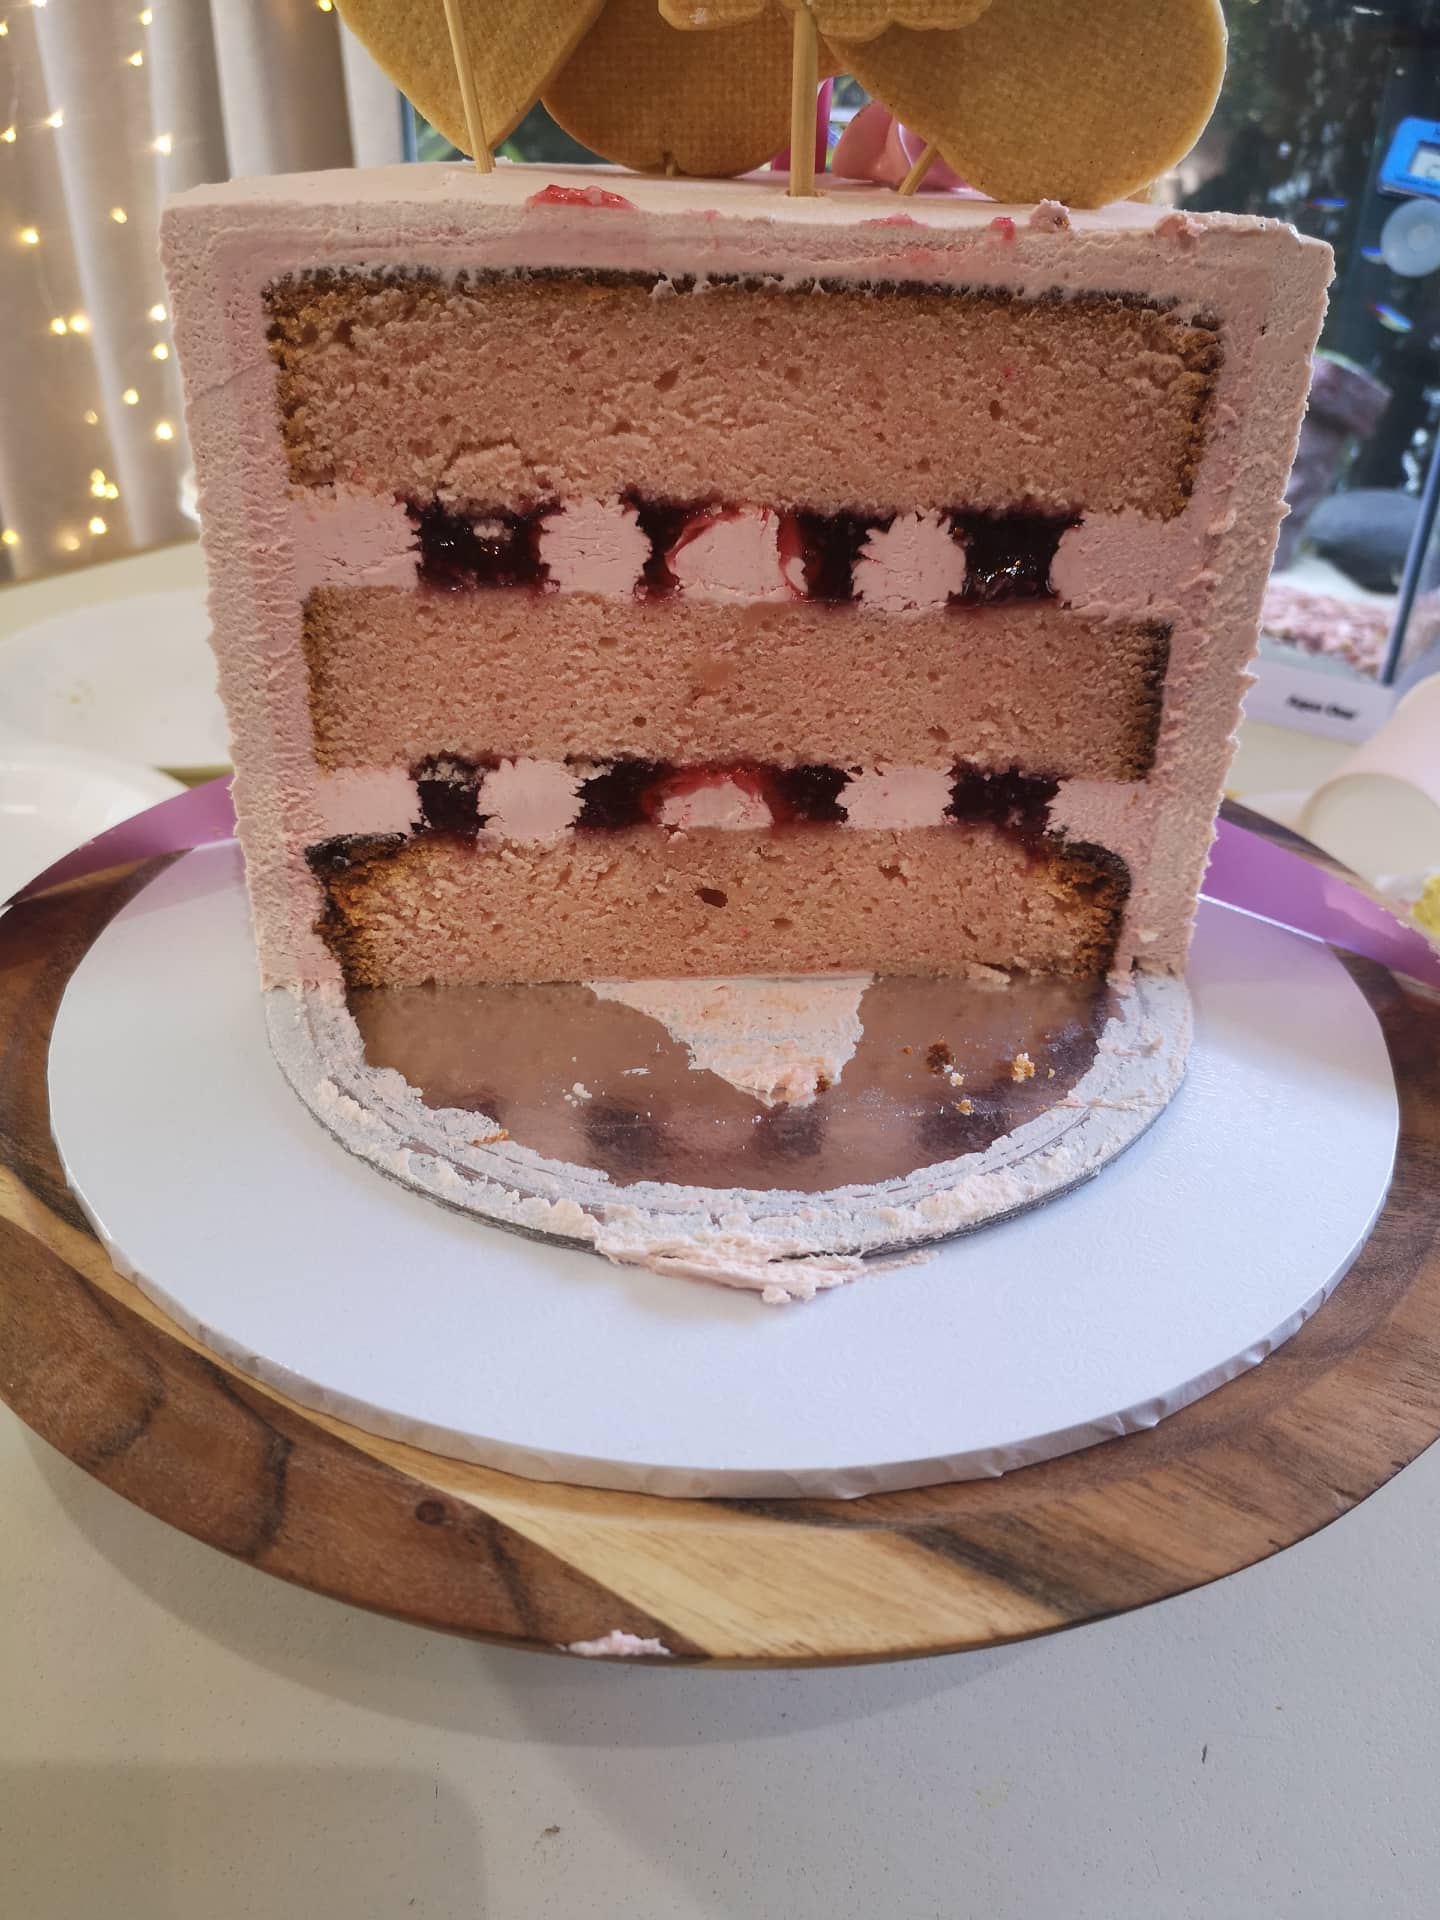 Cut cake showing how good it is inside, with buttercream and raspberry coulis